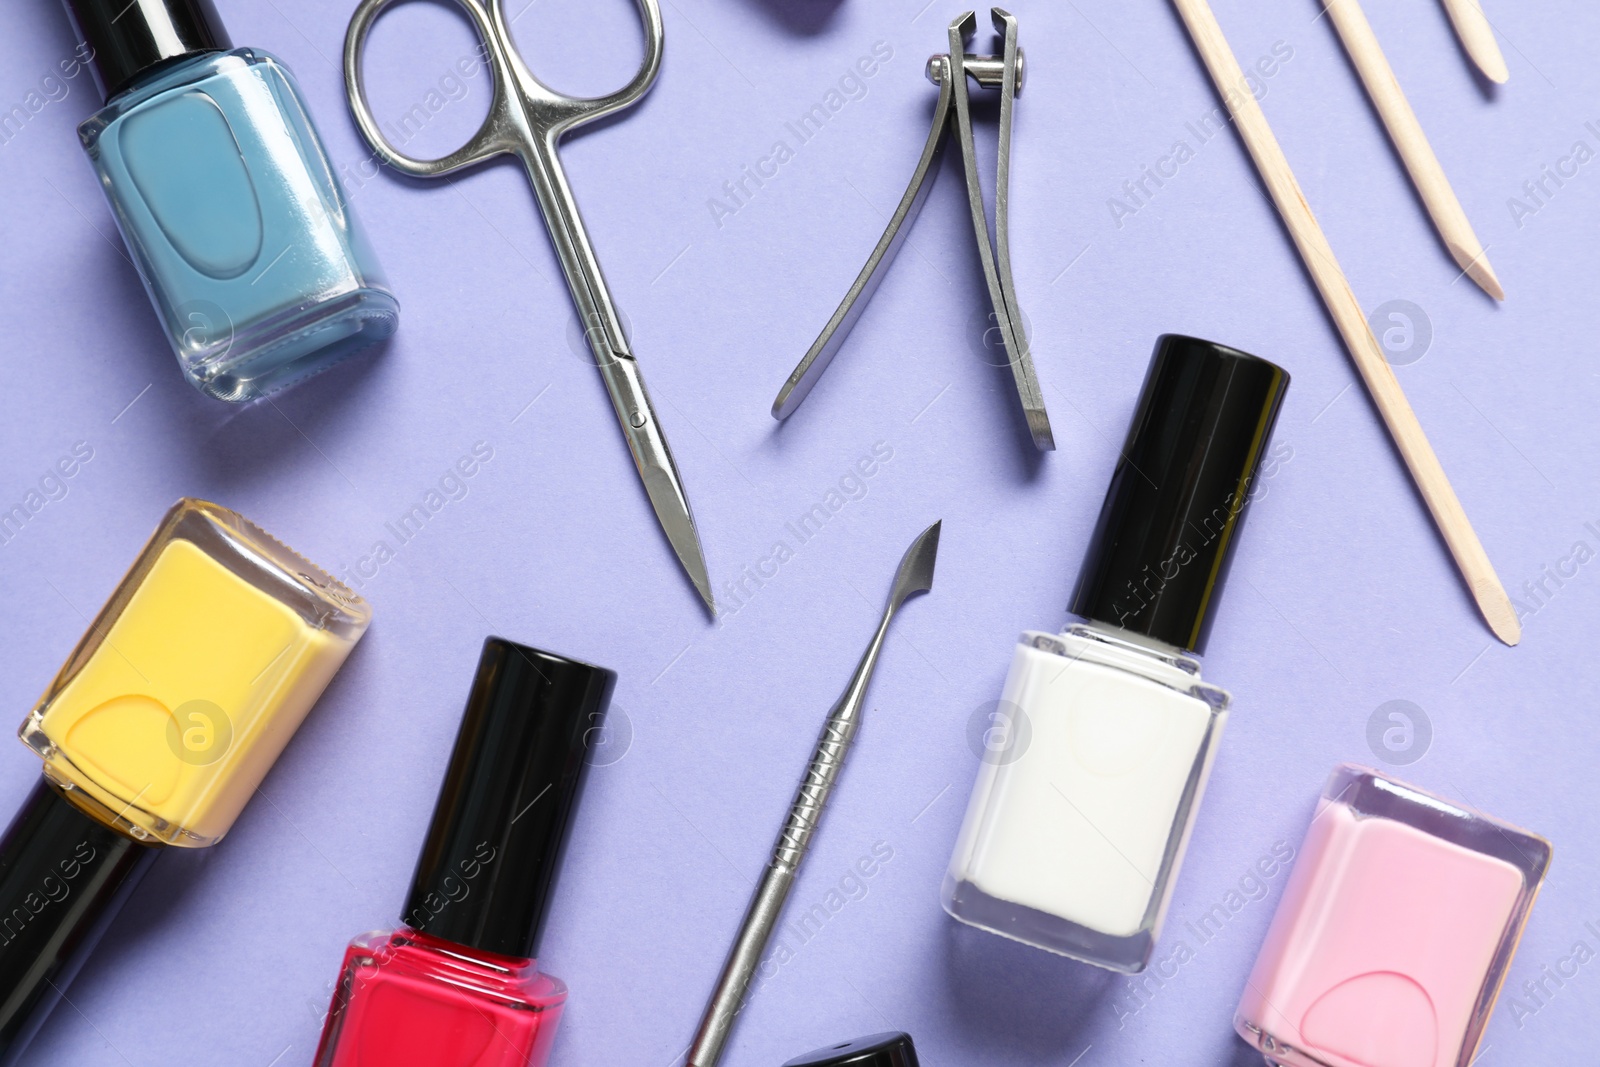 Photo of Nail polishes and set of pedicure tools on lilac background, flat lay